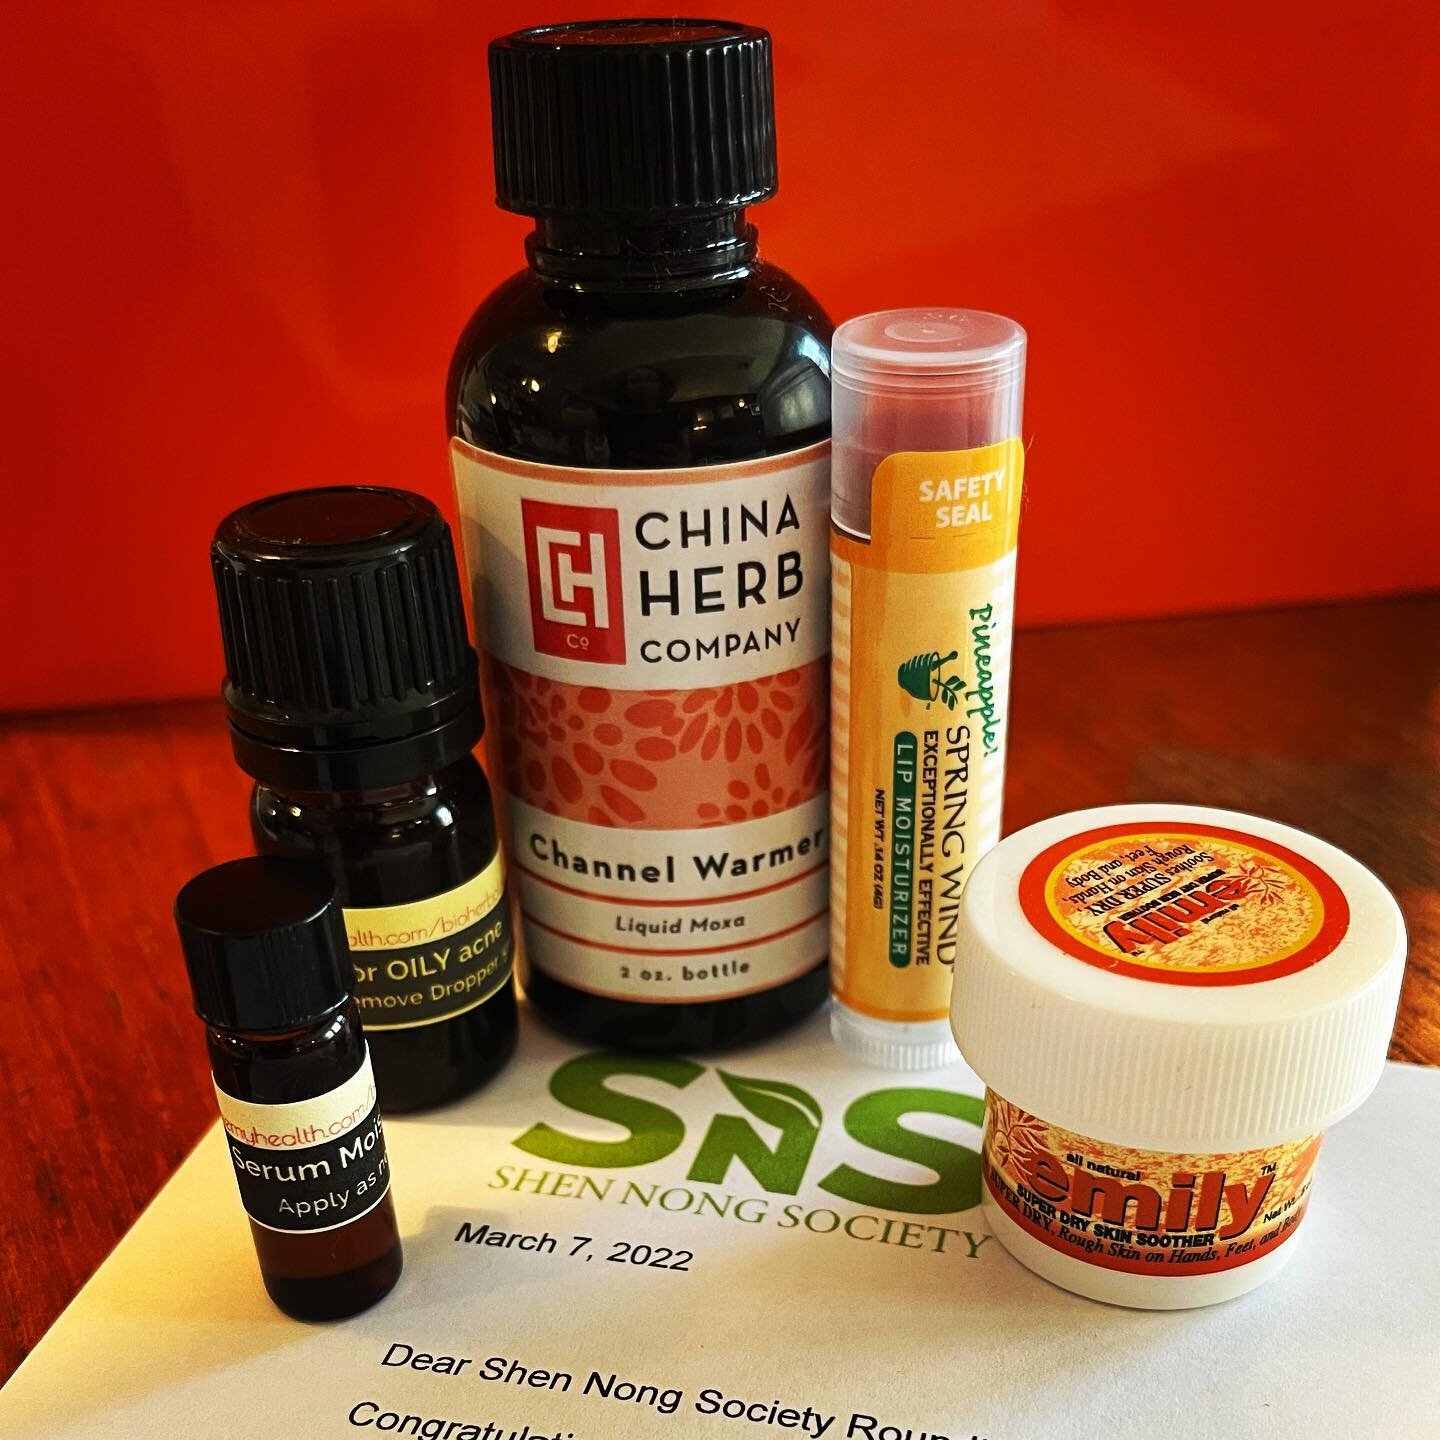 Thanks @shennongsociety for these herbal goodies. Looking forward to the roundtable tomorrow! BRB, gonna go schmear myself with some samples. #herbalmedicine #juniperwellness #acupuncture #herbalhealing